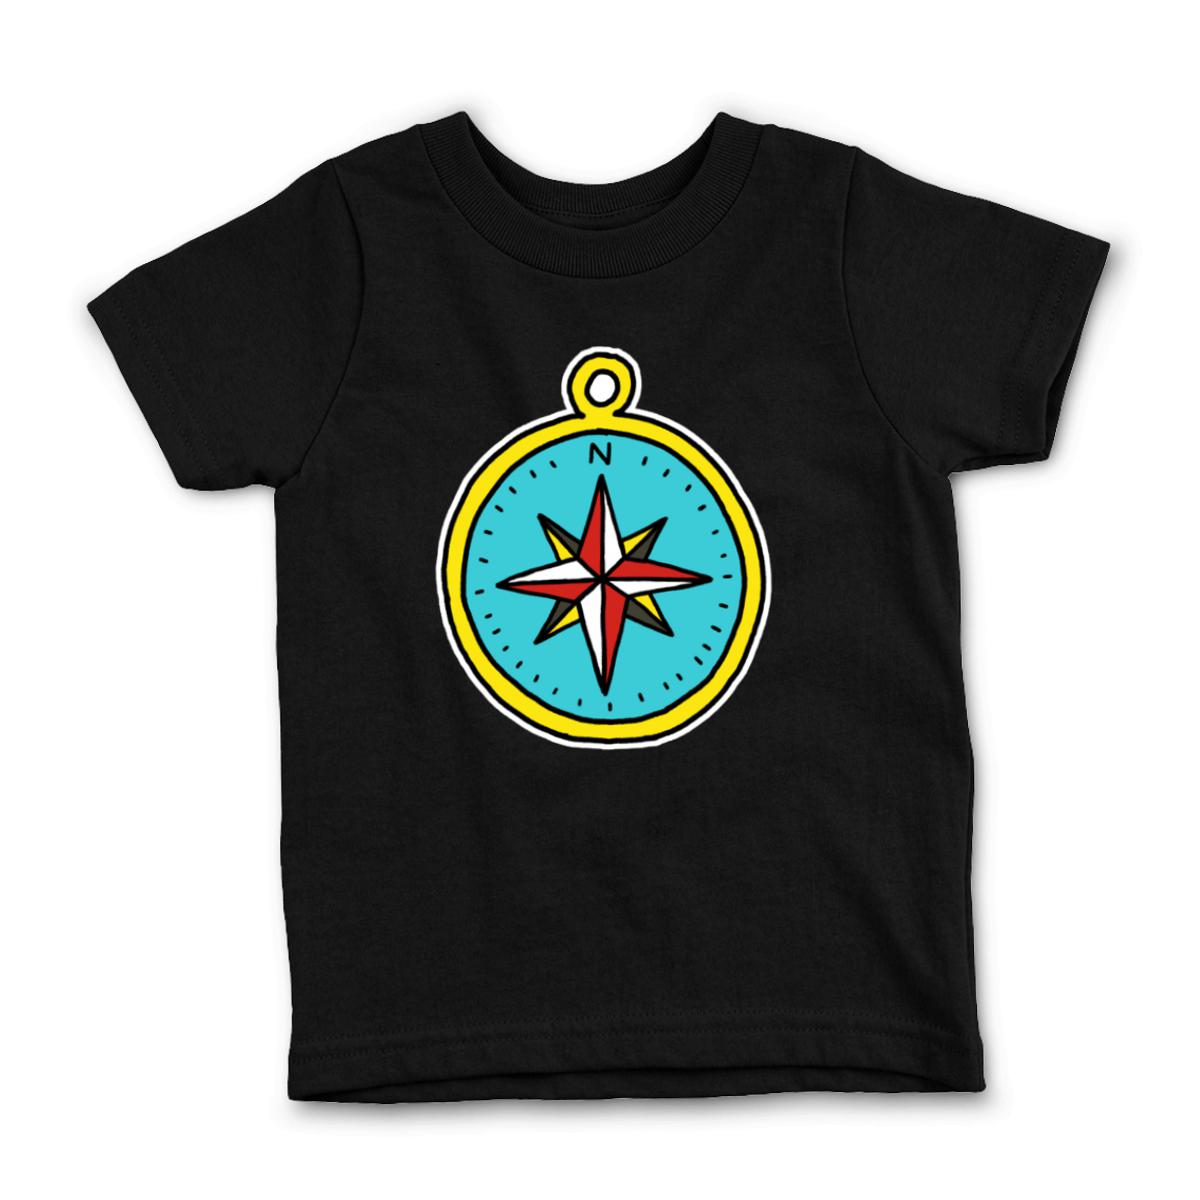 American Traditional Compass Kid's Tee Small black